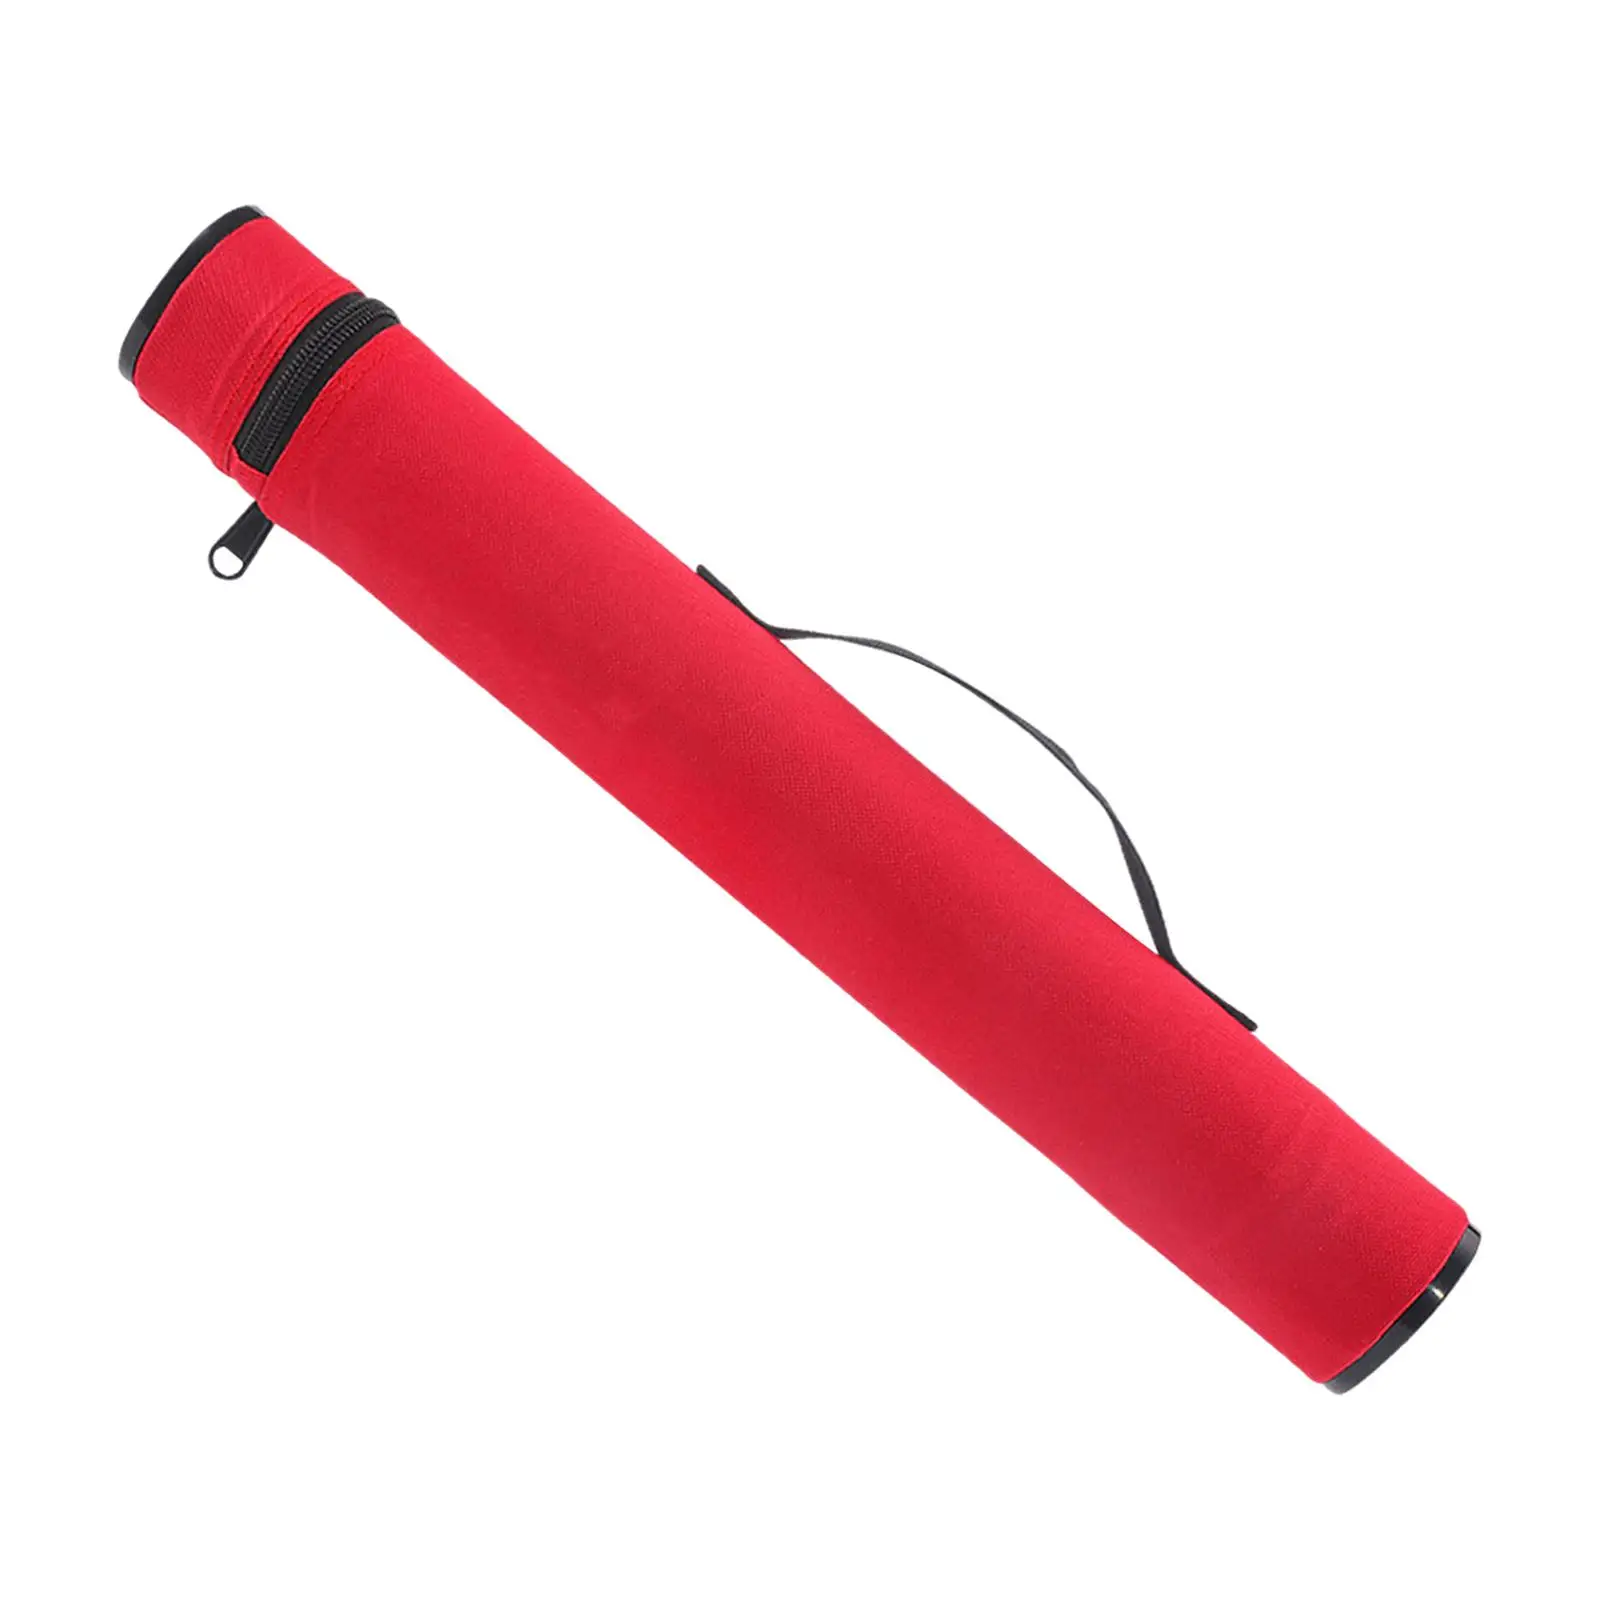 Fly Fishing Rods Case Protector Protective Cover Fishing Gear with Shoulder